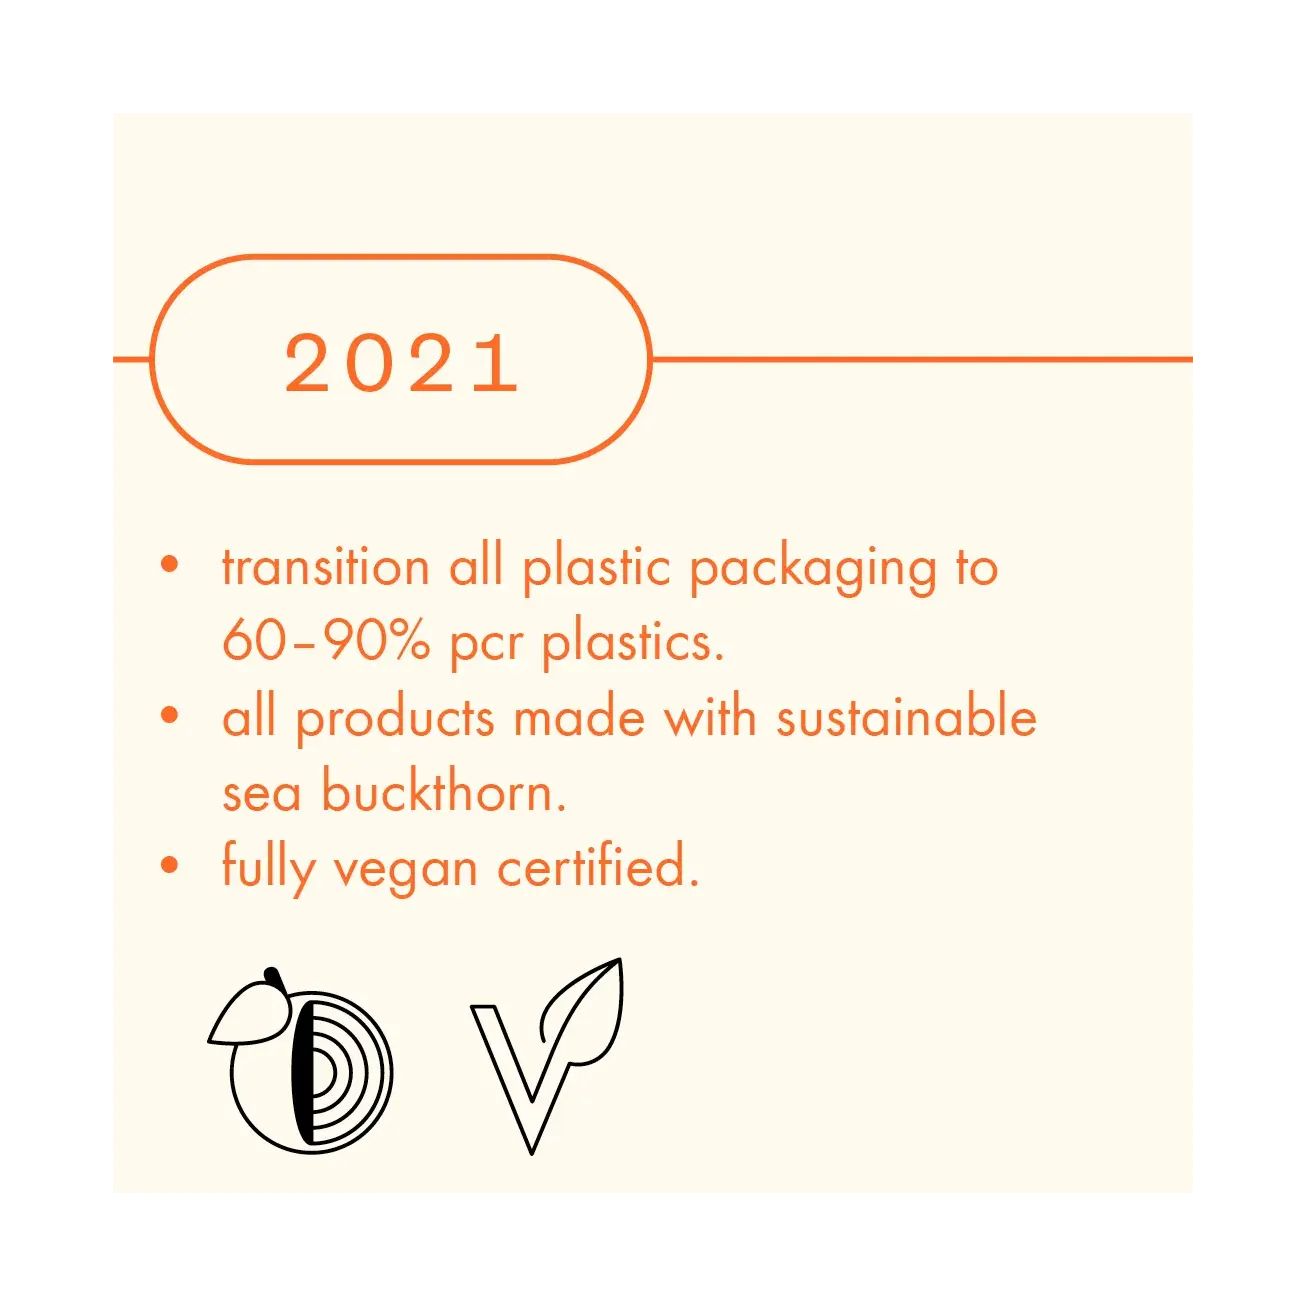 2021 sustainability goals: transition all plastic packaging to 60-90% pcr plastics, all products made with sustainable sea buckthorn, and fully vegan certified.